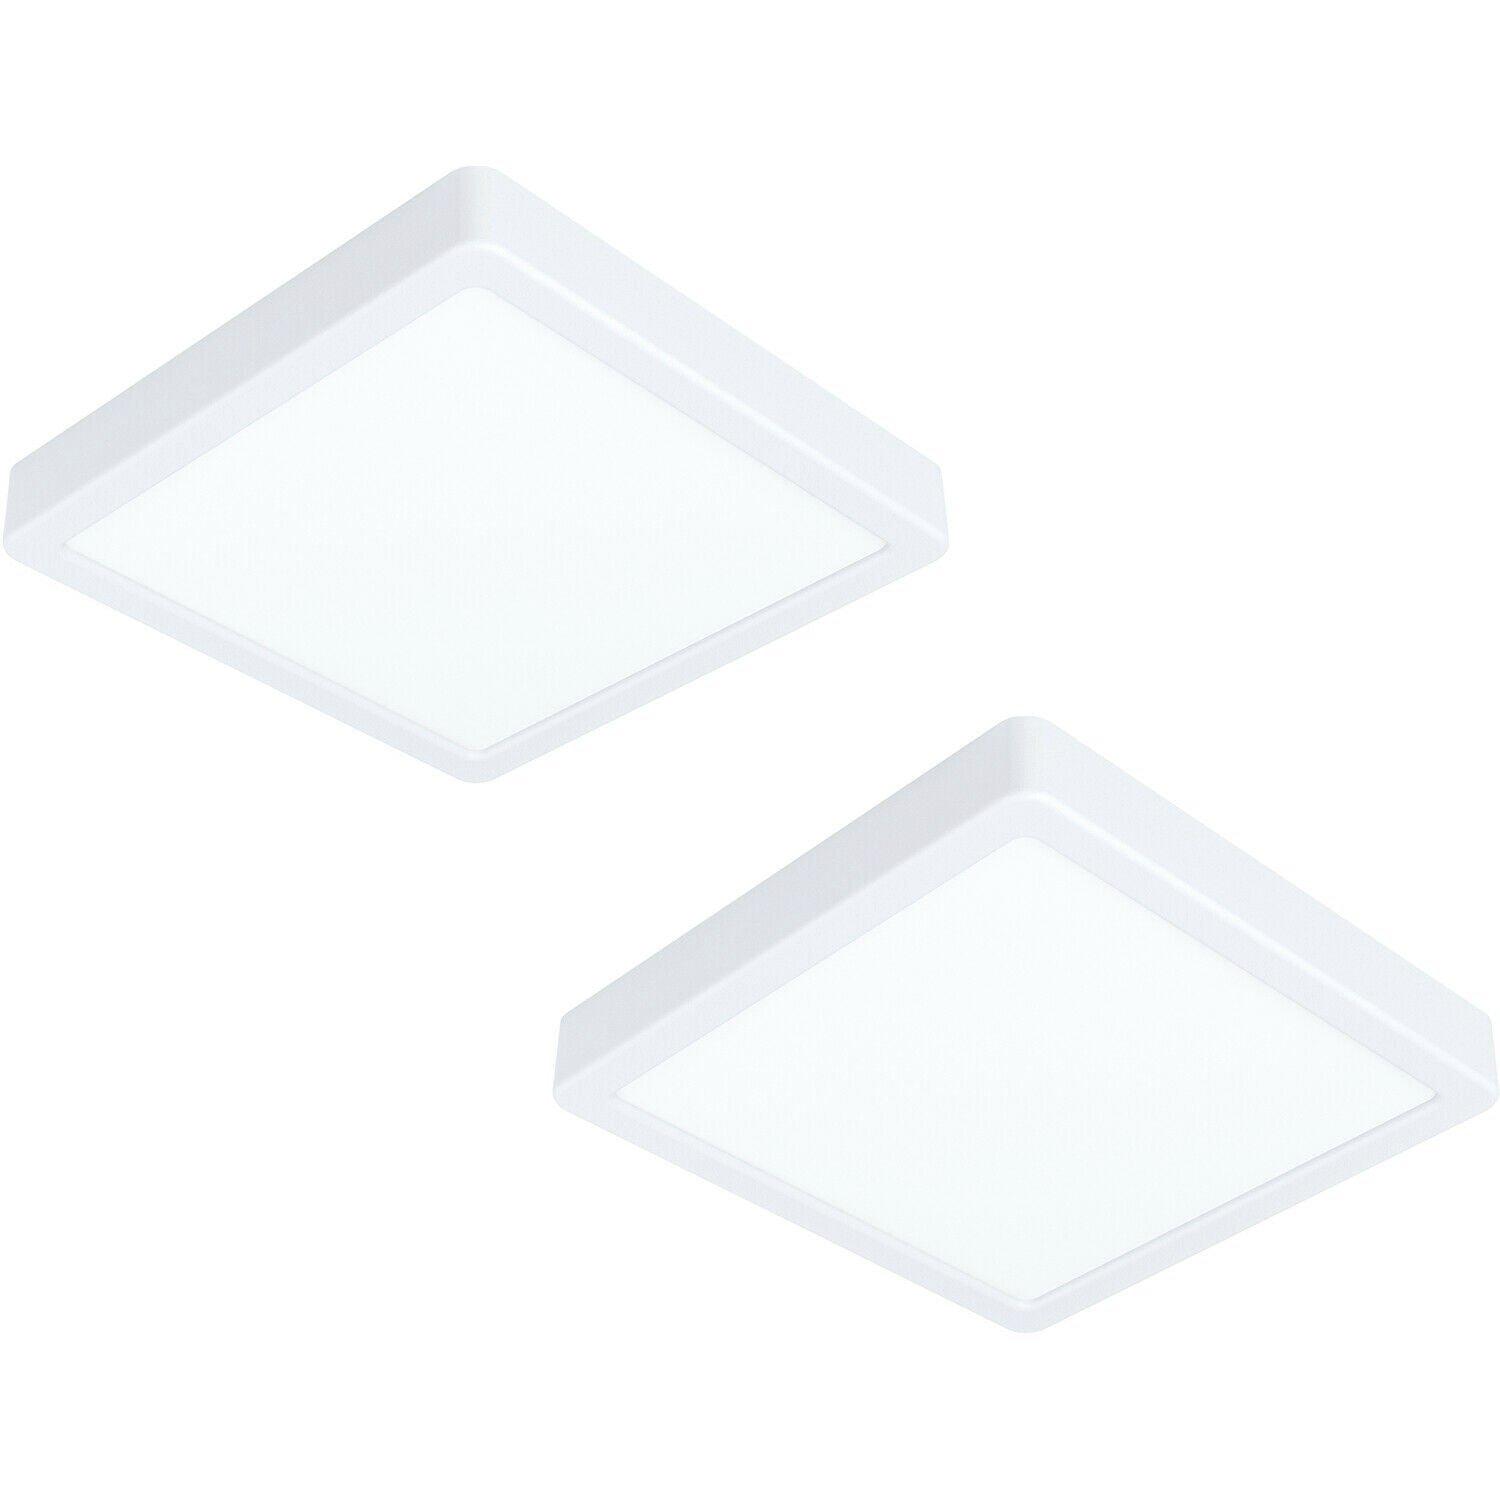 2 PACK Wall / Ceiling Light White 210mm Square Surface Mounted 16.5W LED 3000K